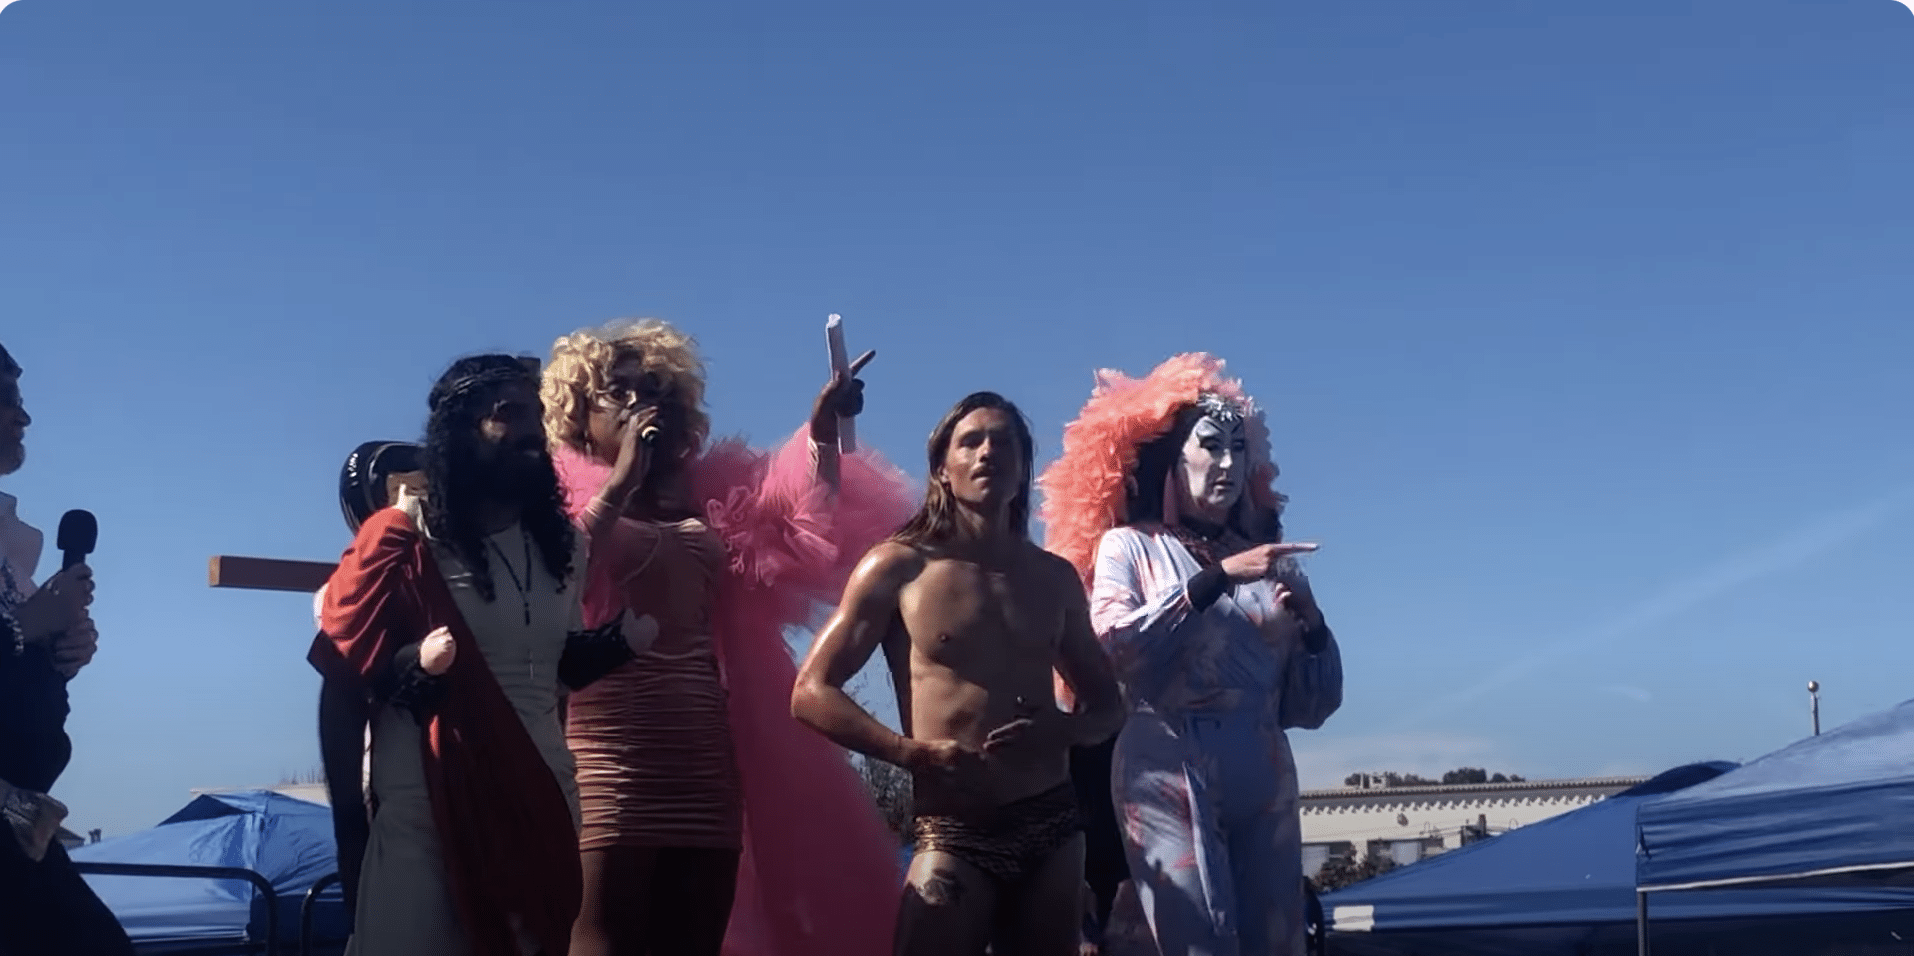 Drag nun troupe hosts annual ‘Hunky Jesus’ costume contest mocking Jesus and the Virgin Mary